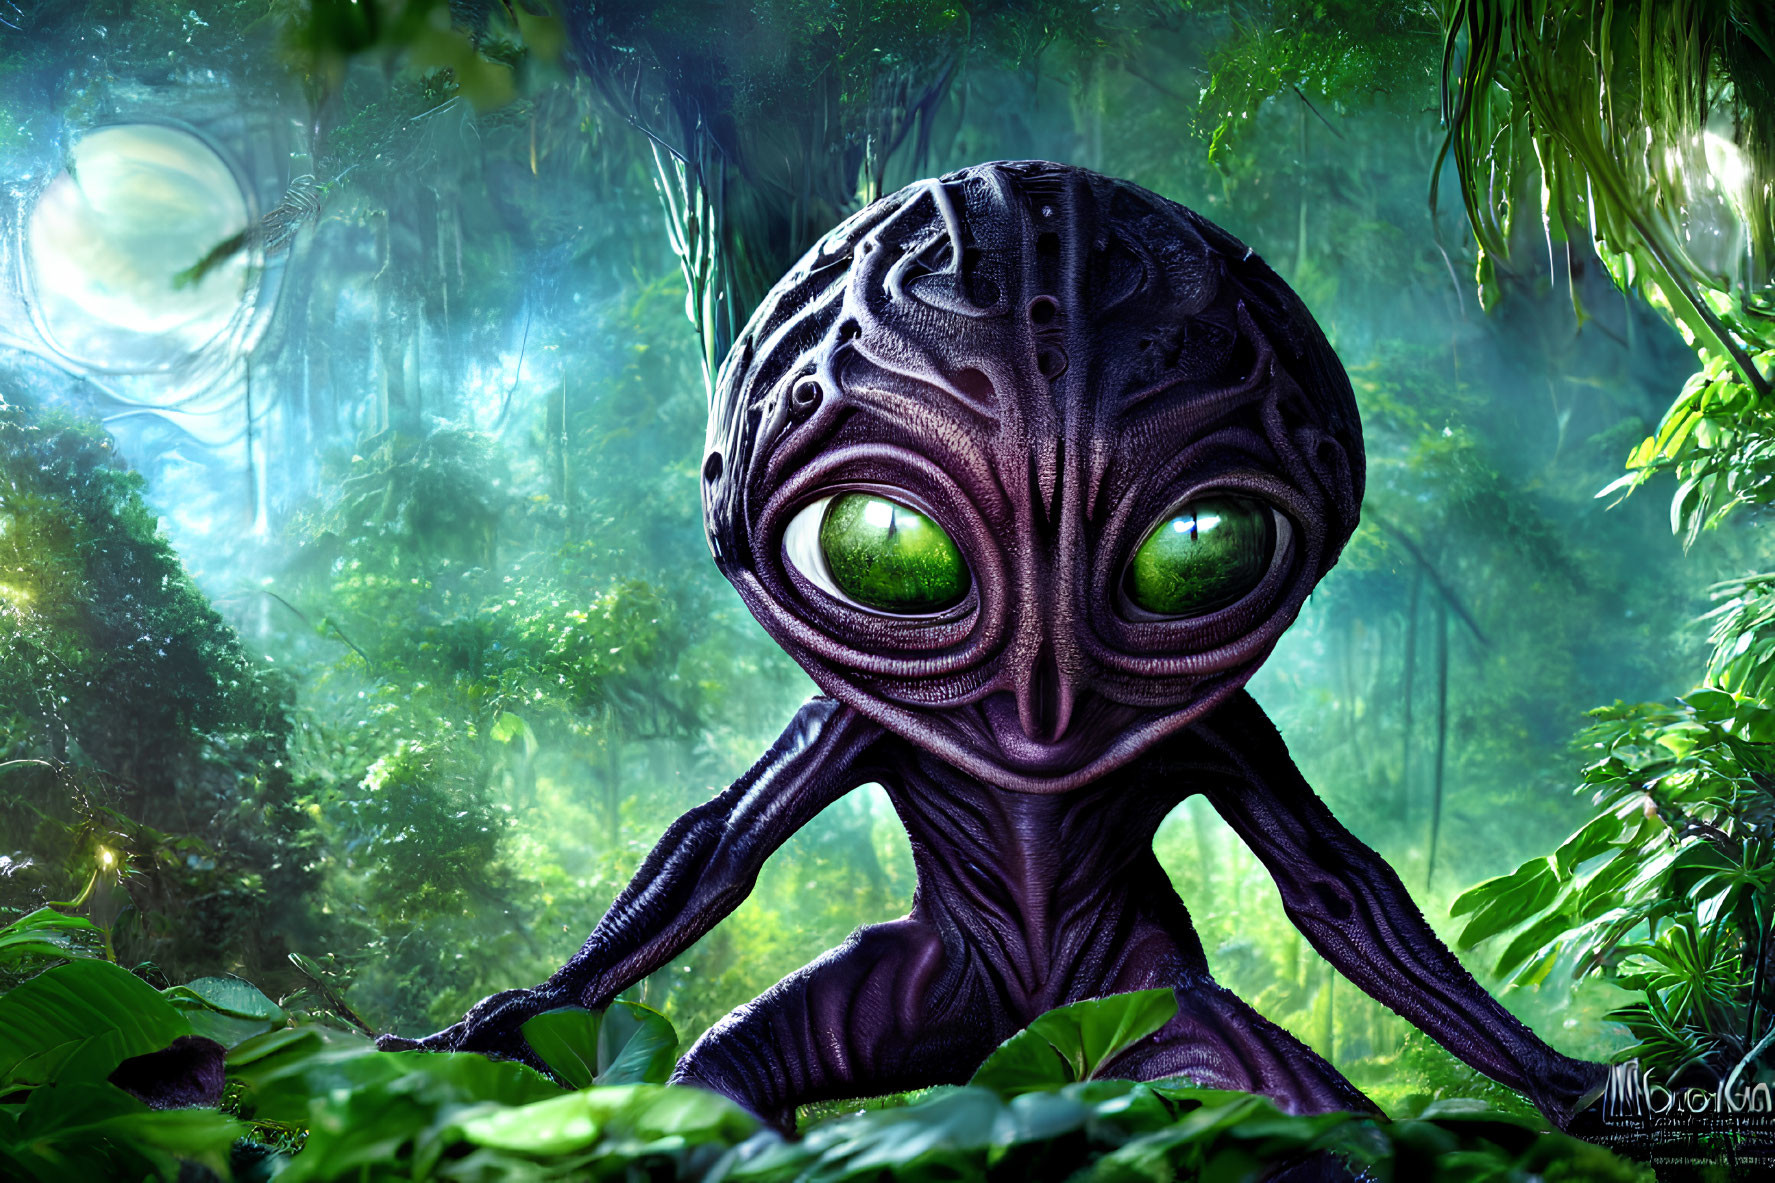 Alien creature with large green eyes in lush, foggy forest